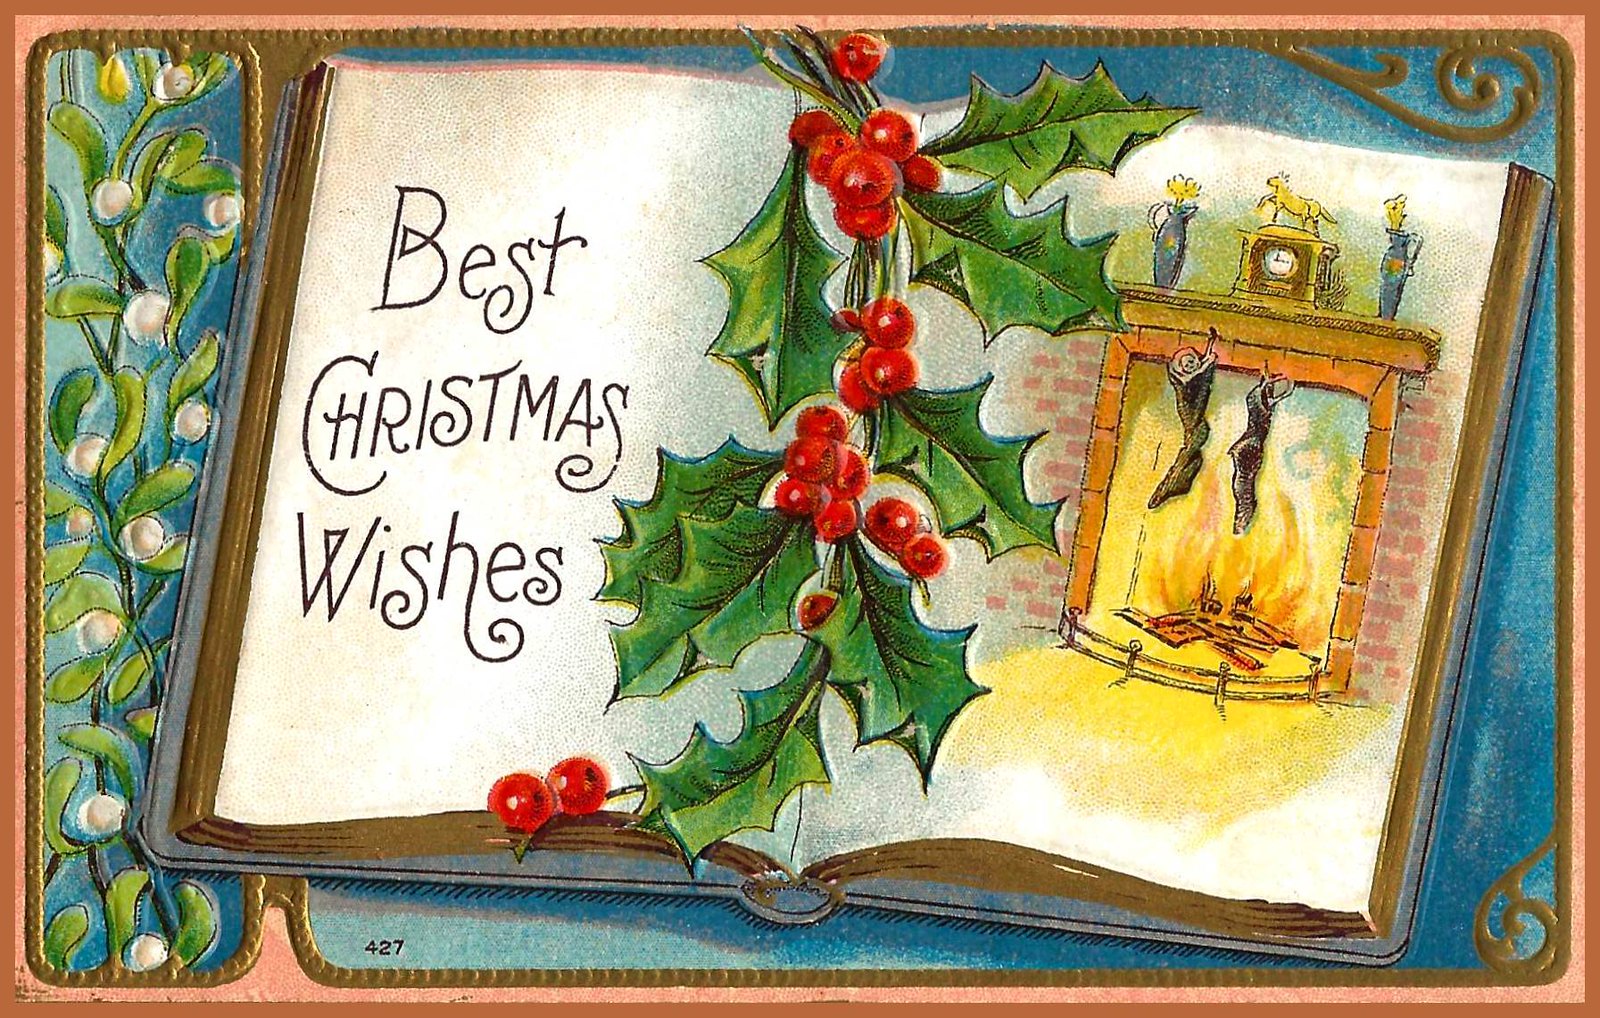 'Best Christmas Wishes' greeting card - 1910